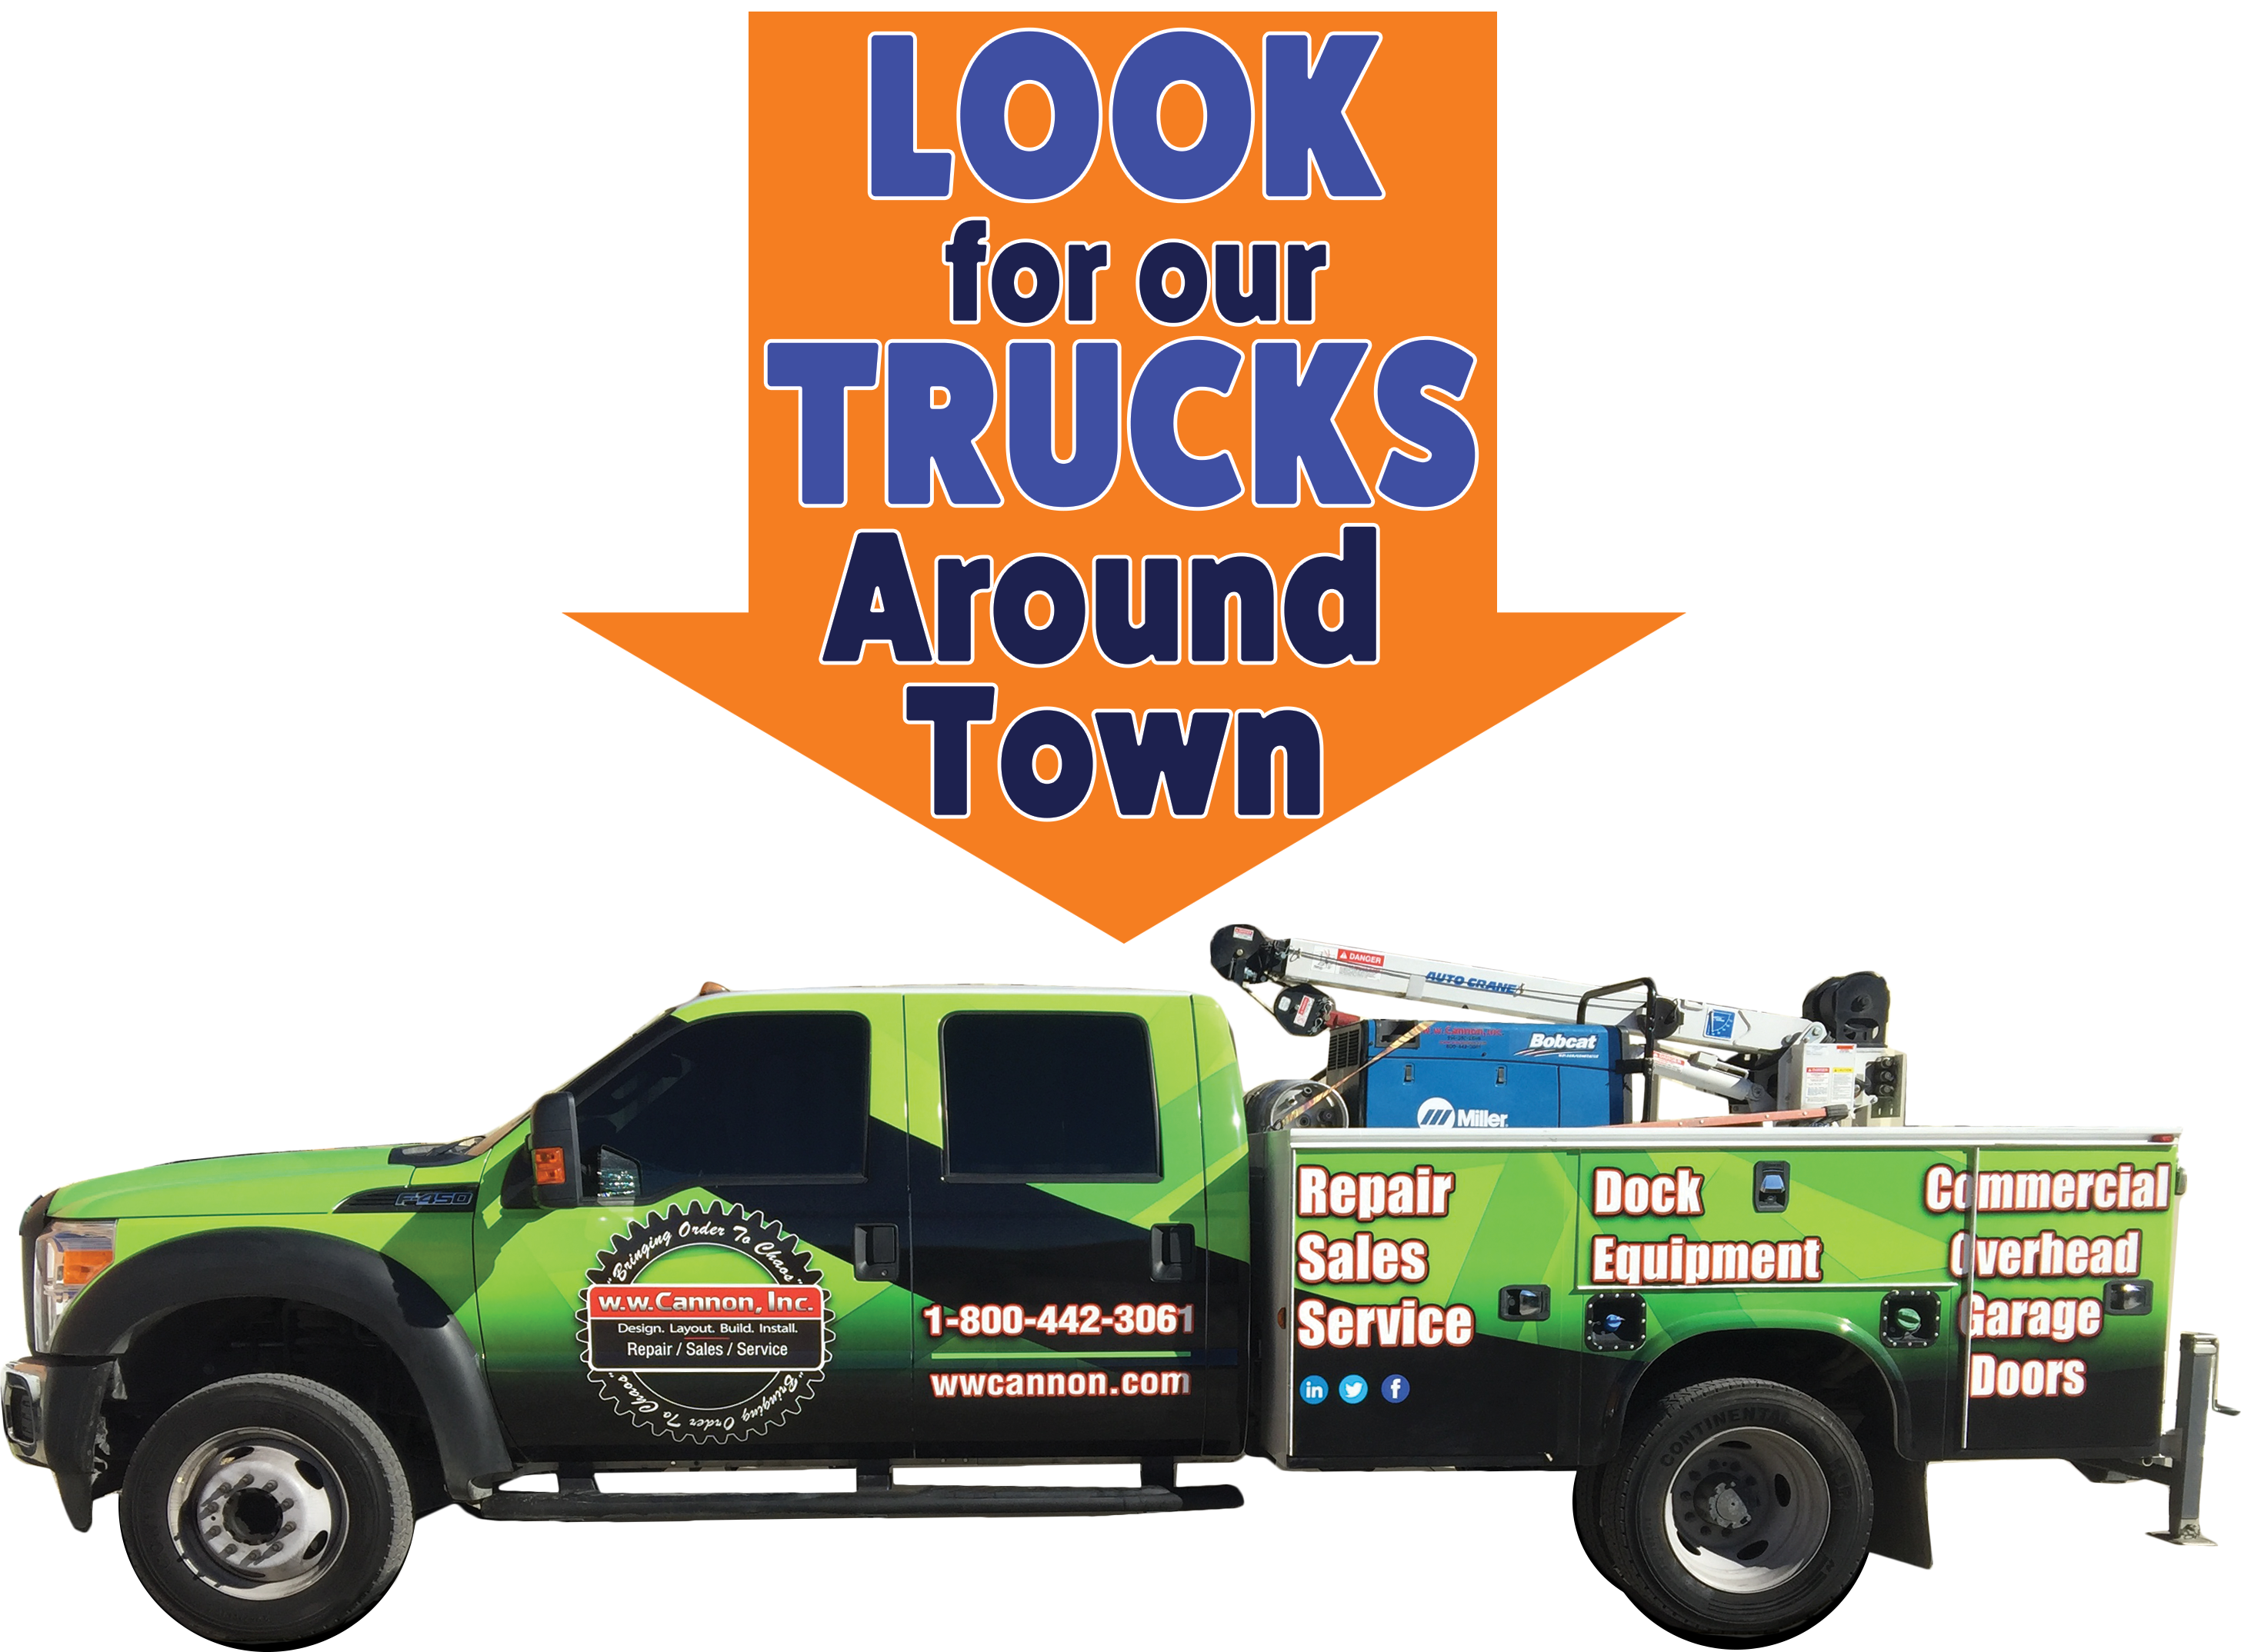 2016-look-for-our-trucks-around-town7